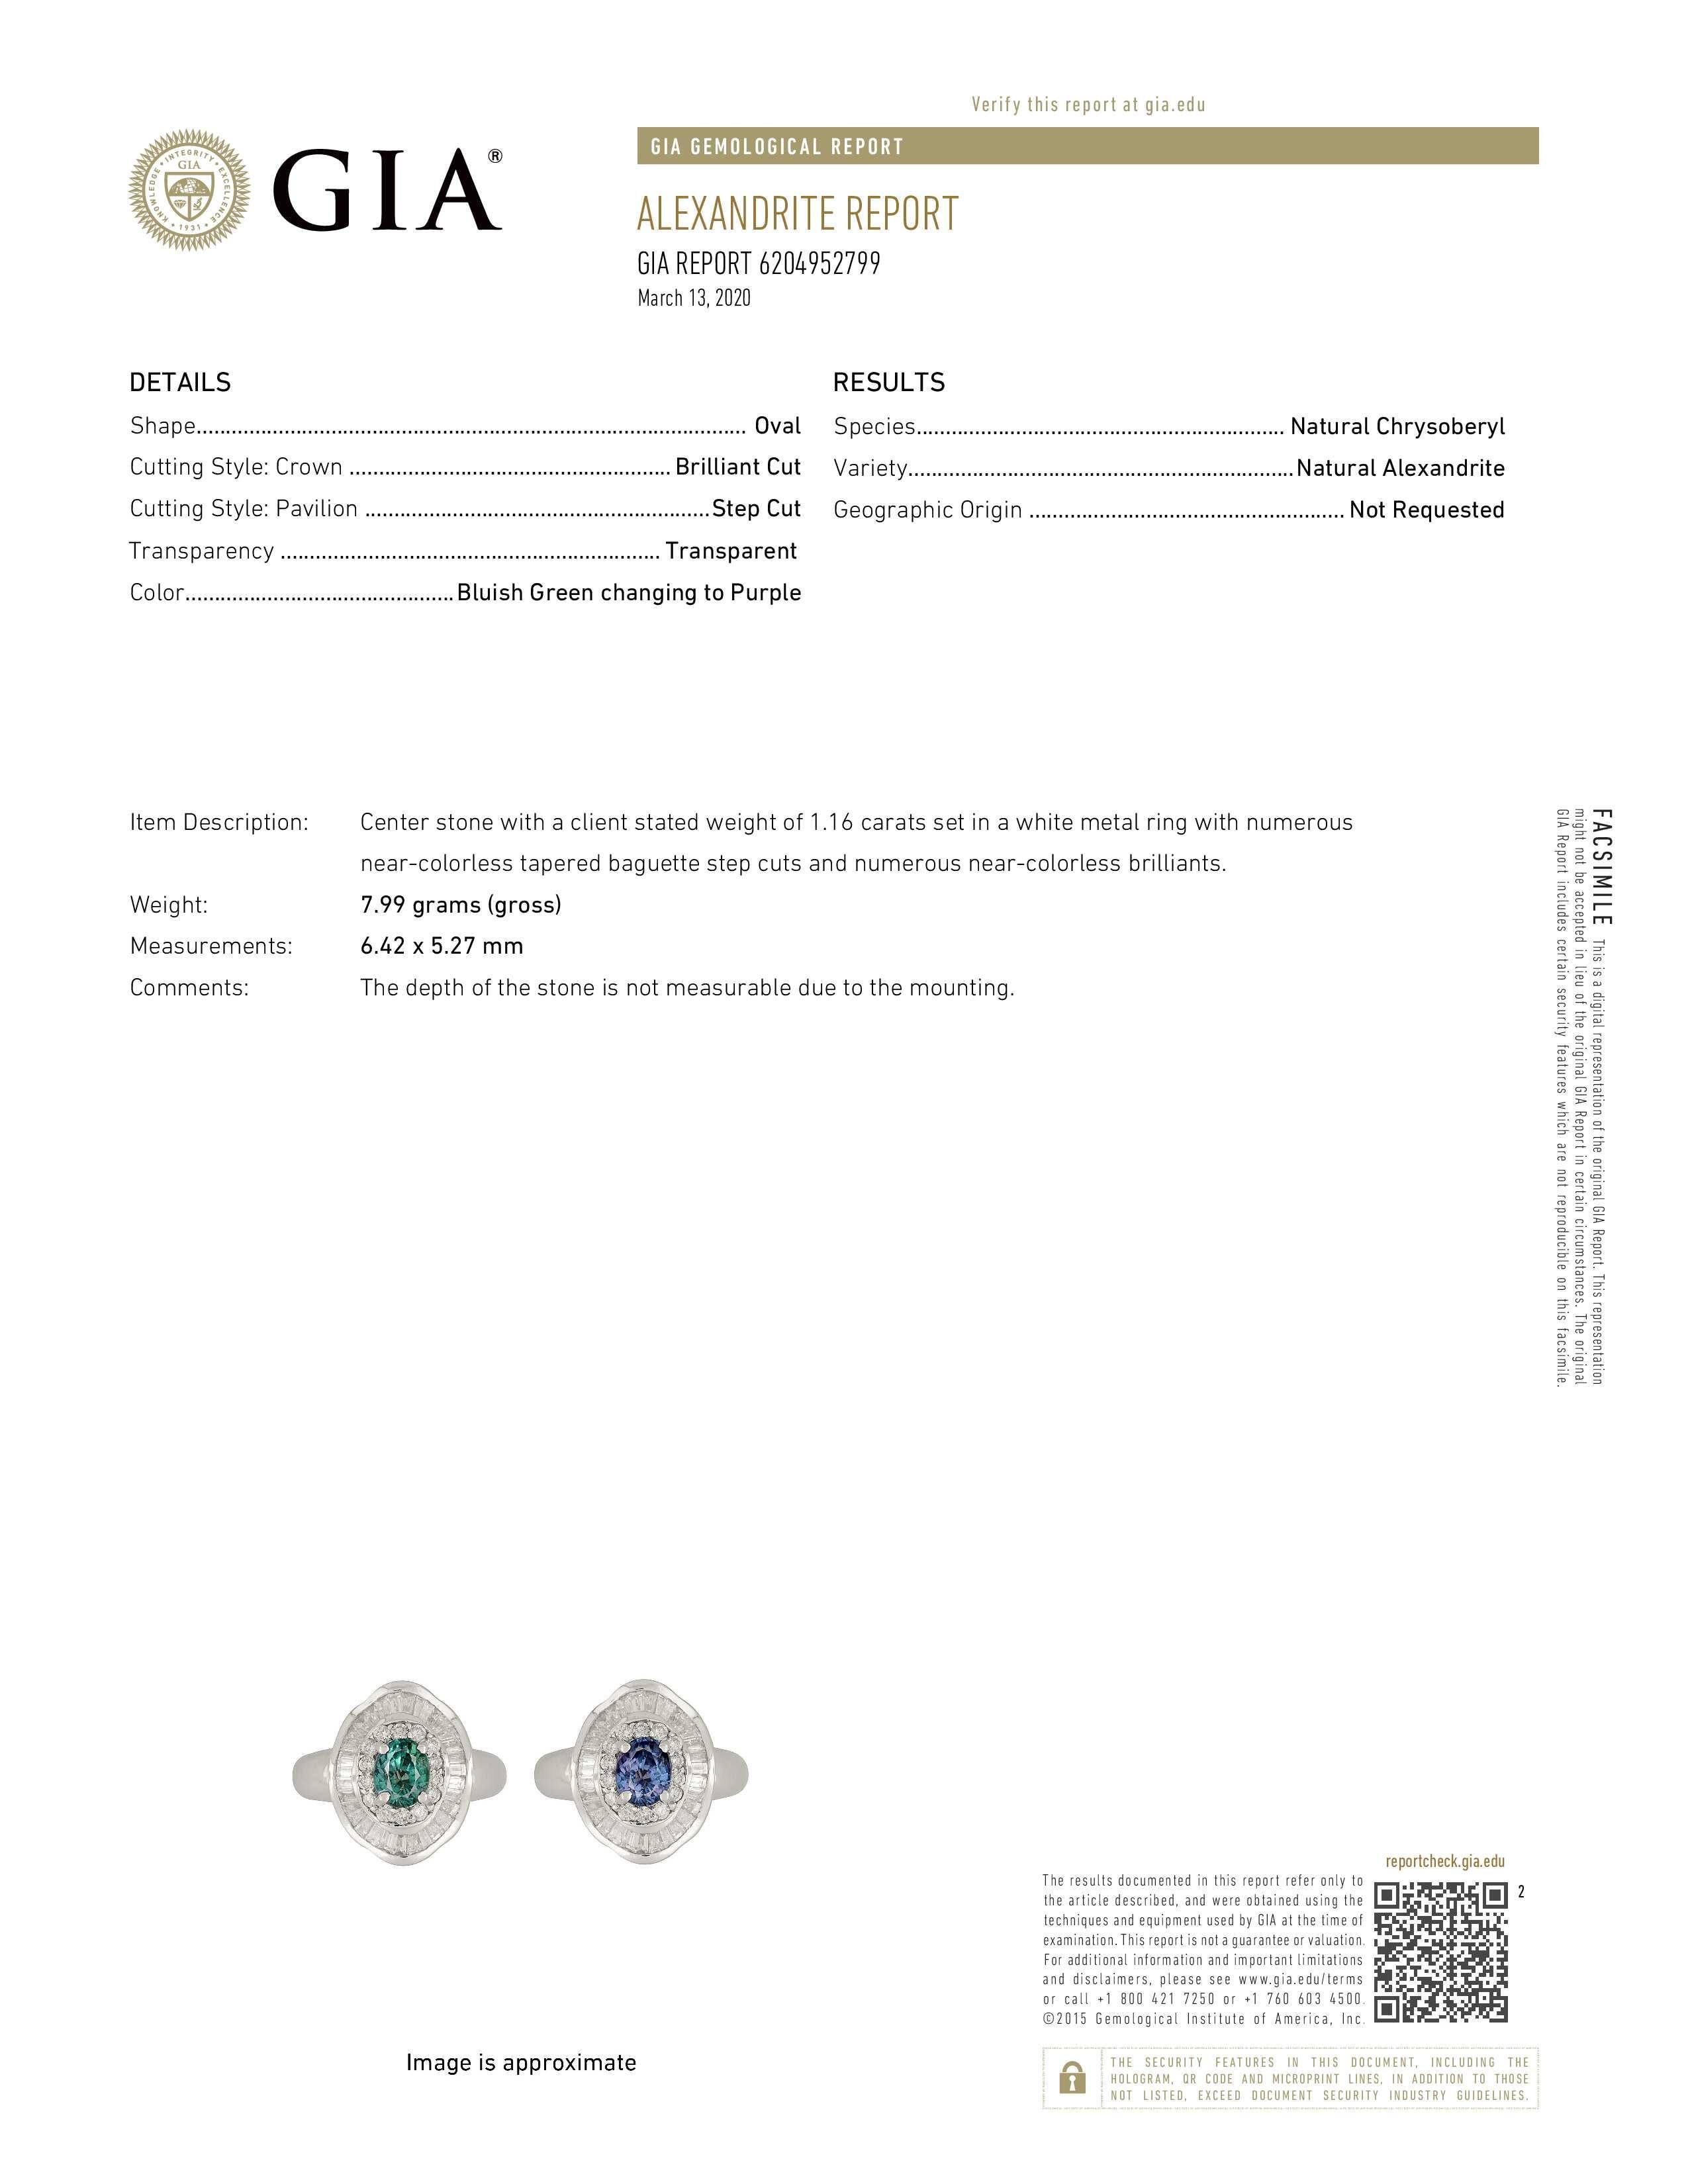 Women's Natural GIA Certified 1.16 Ct. Brazillian Alexandrite & Diamond Cocktail Ring For Sale